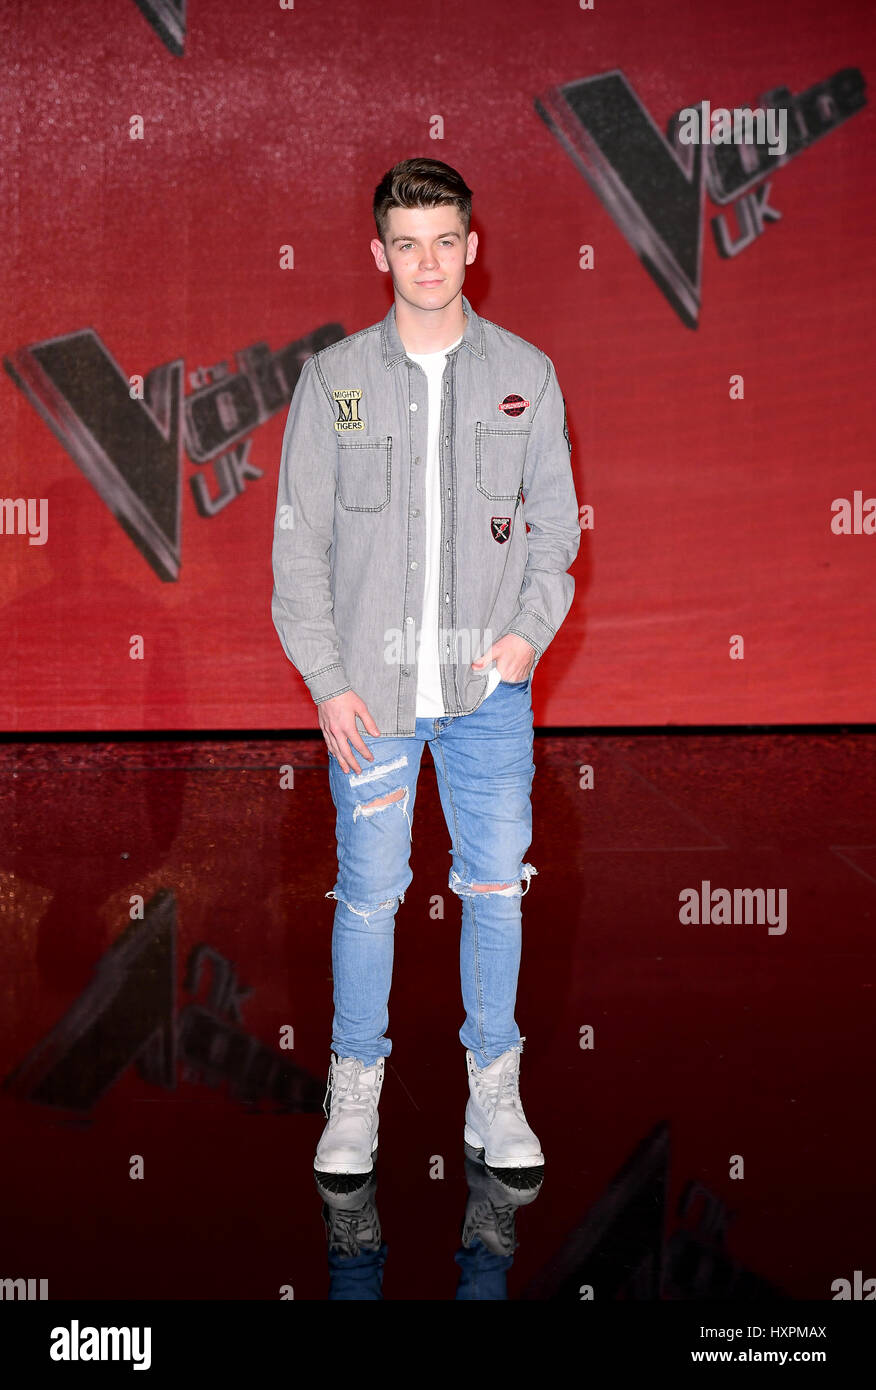 Jamie Miller Attending The Voice Uk Final Photocall In London